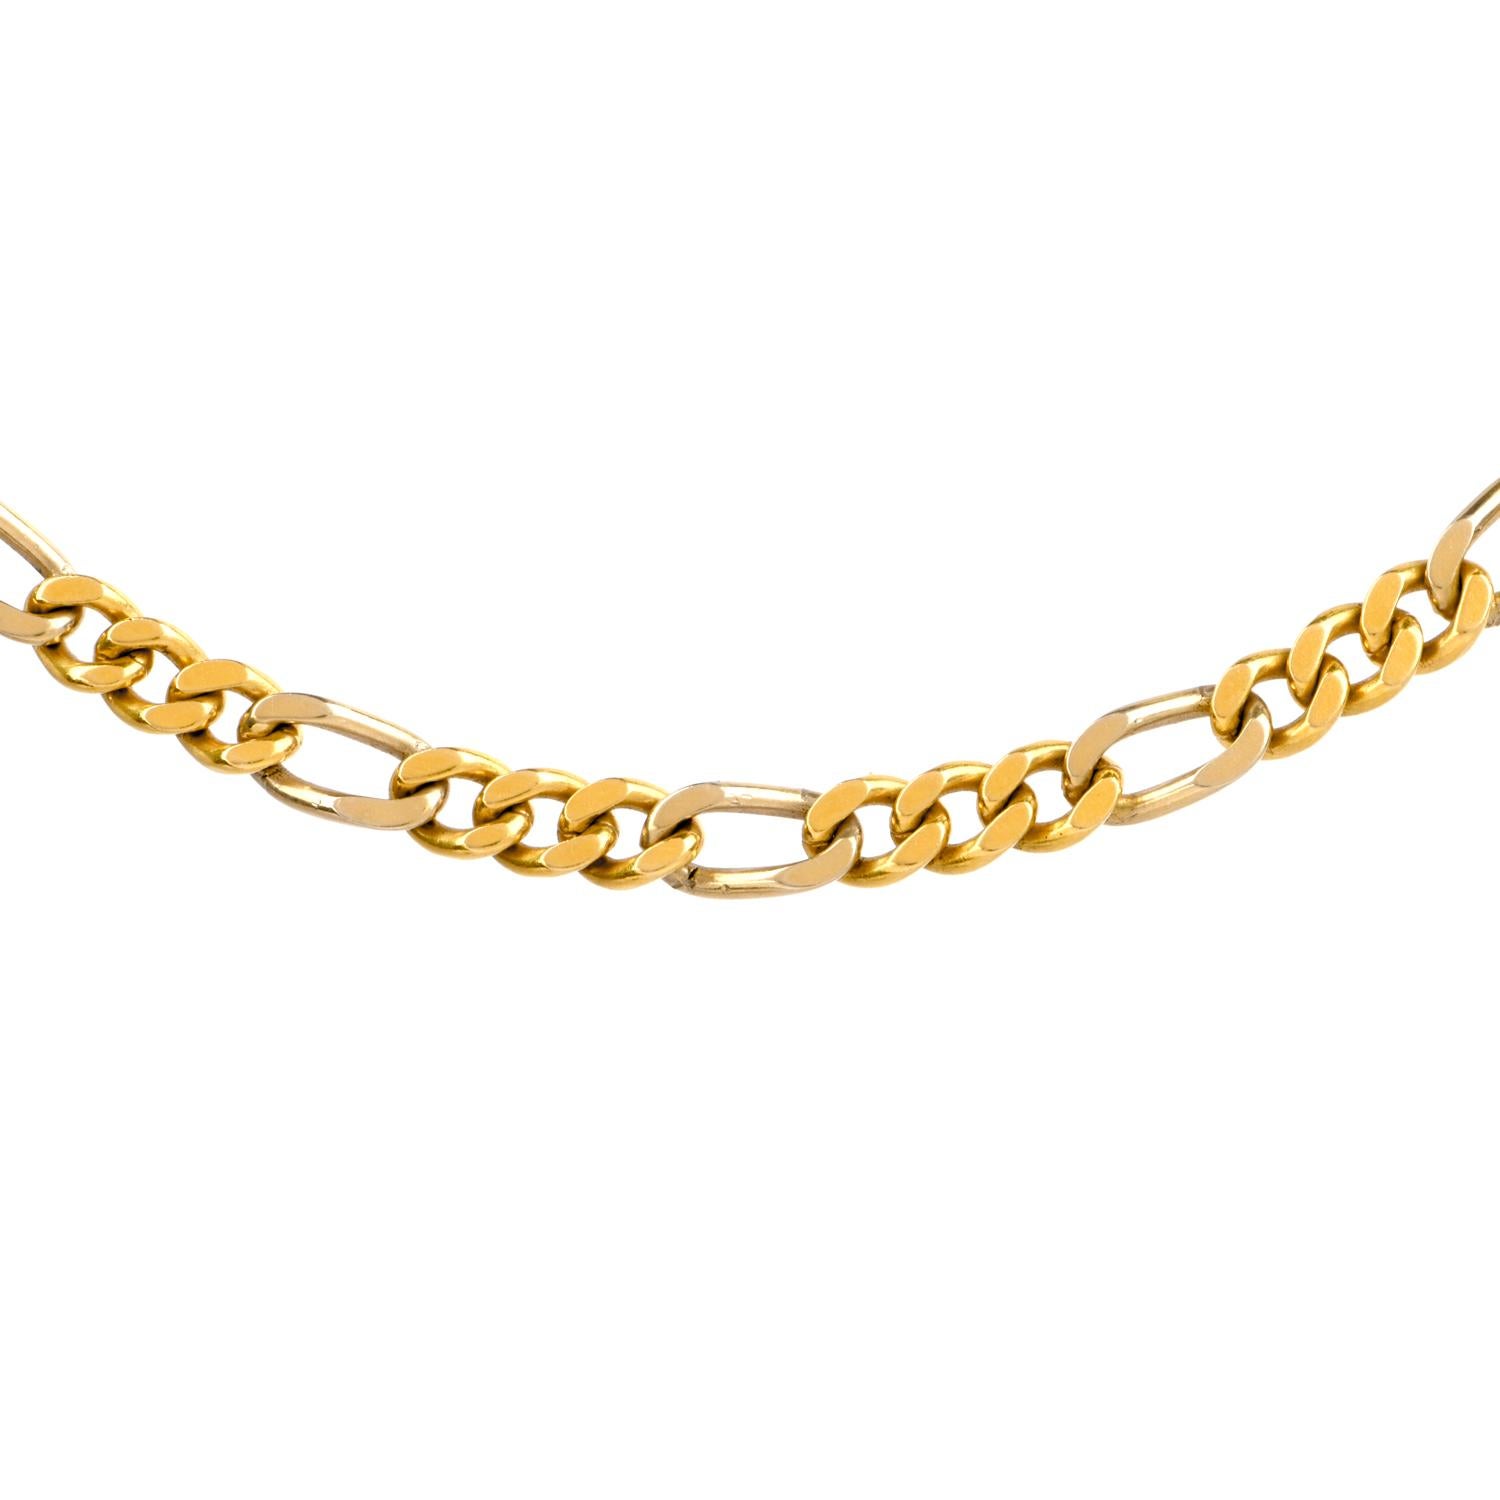 Women's or Men's Vintage 1970s Heavy Figaro Gold Long Chain Necklace